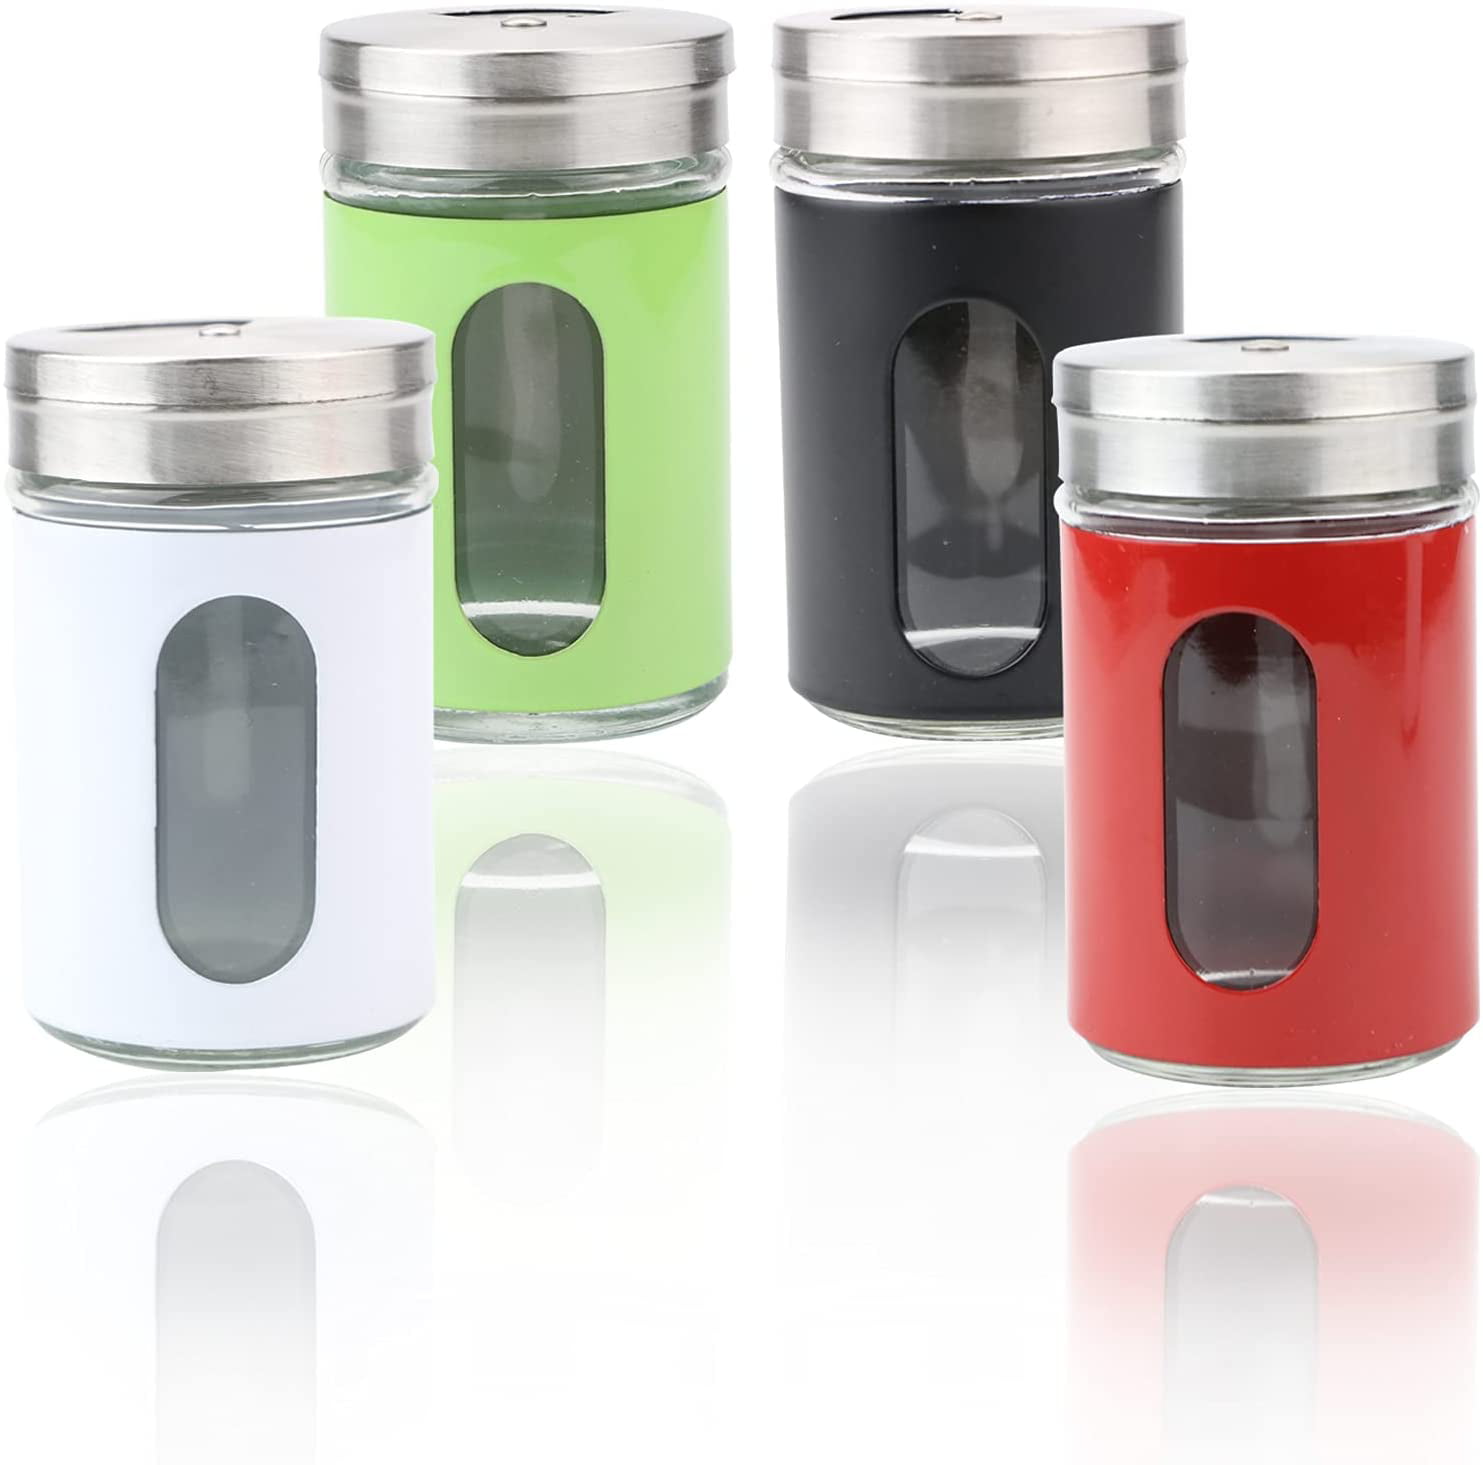 TKOnline 4 Pack Salt and Pepper Shakers Stainless Steel and Glass Set with Adjustable Pour Holes Glass Spice Jars Spice Dispenser,Elegant Salt and Pepper Dispenser 4 Assorted Colors 